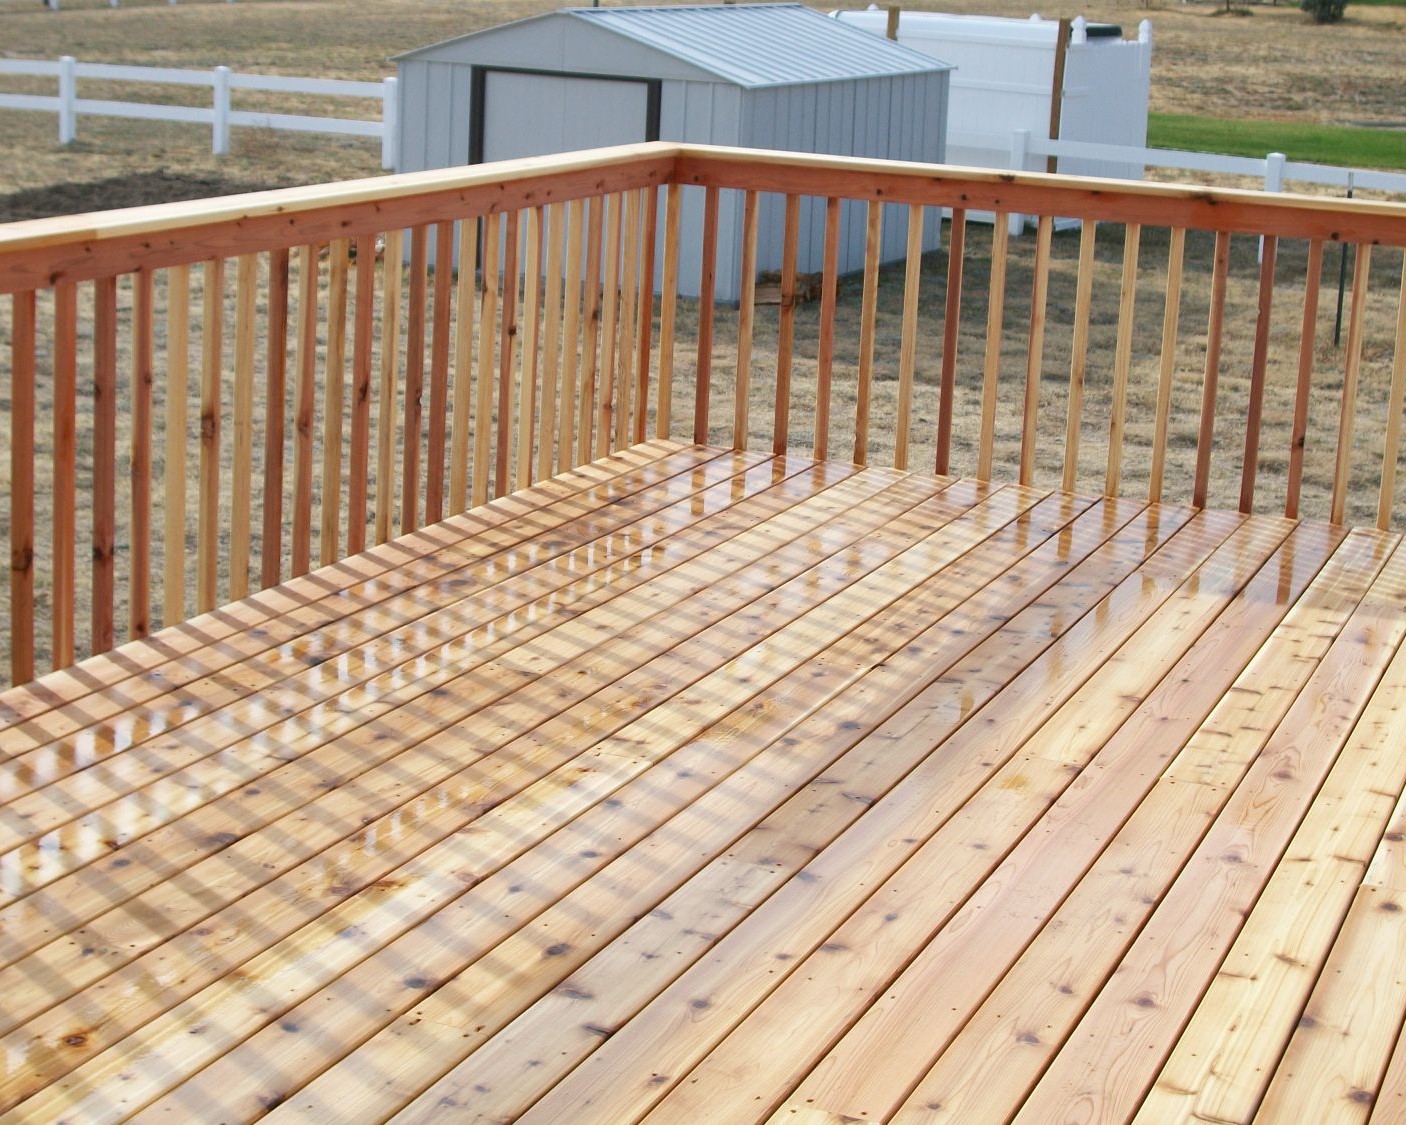 Gorgeous Cedar deck with a picket fence railing and drink cap.